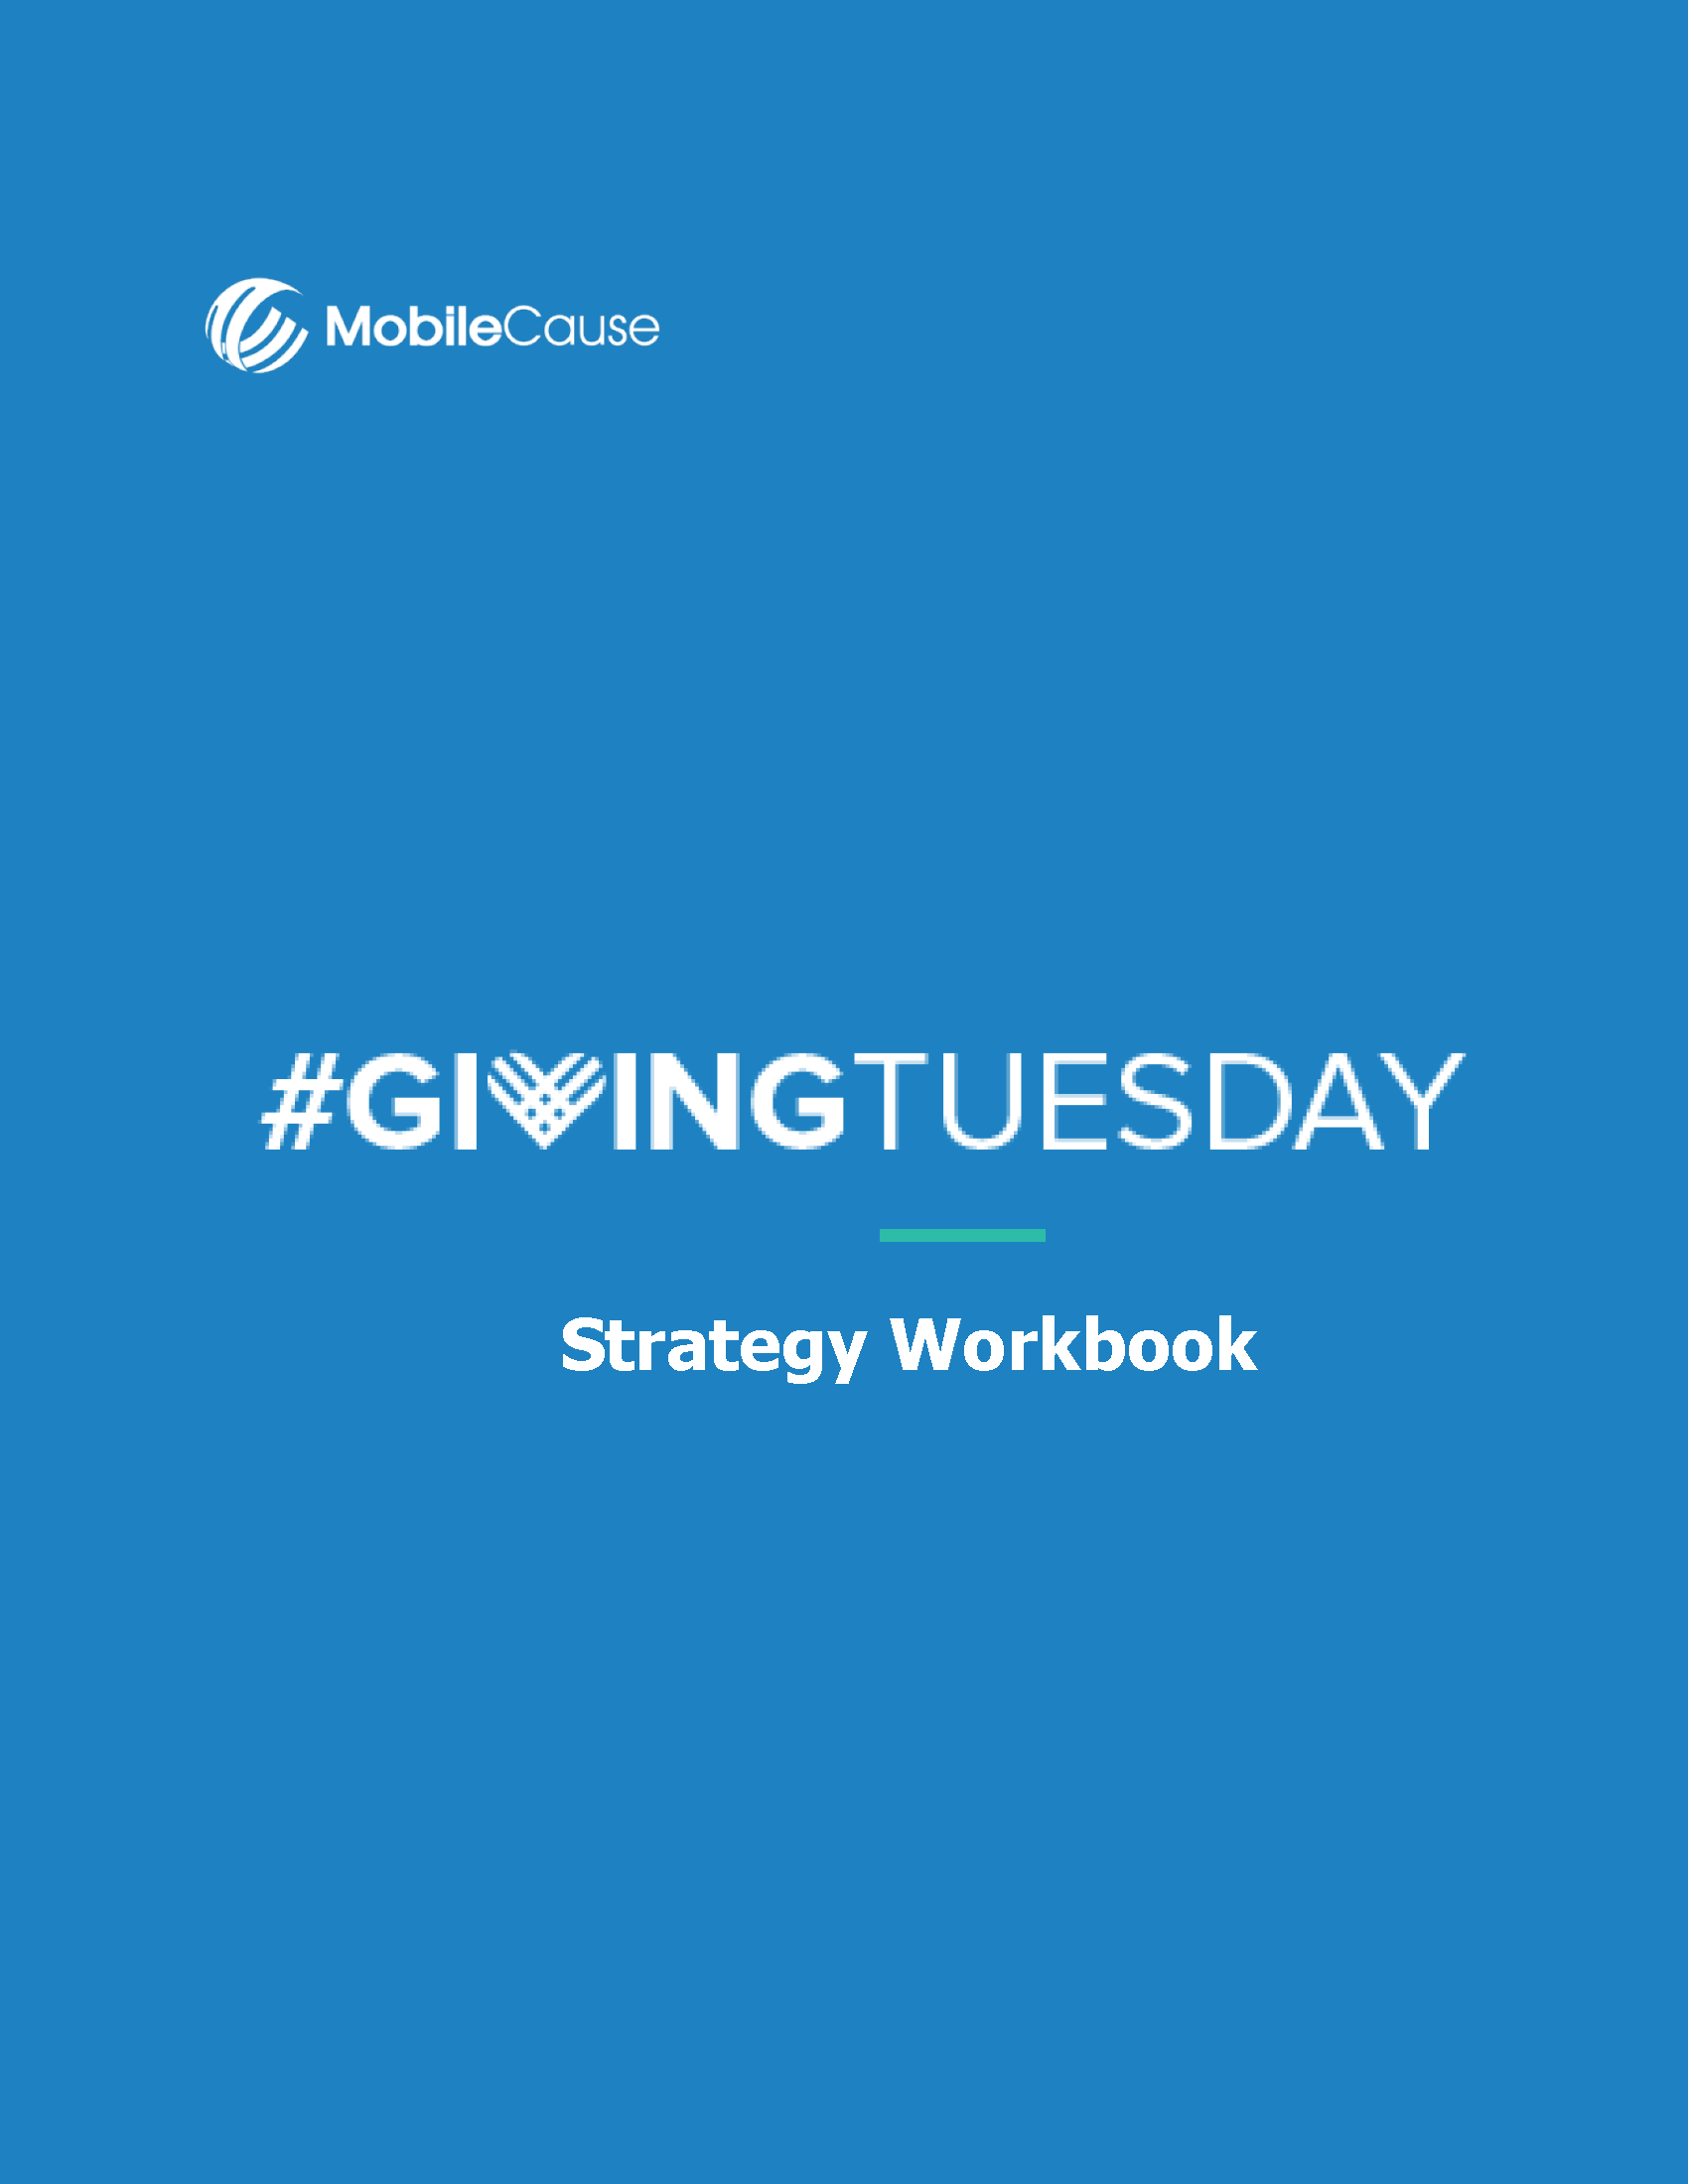 MobileCause Academy Giving Tuesday Workbook Cover 